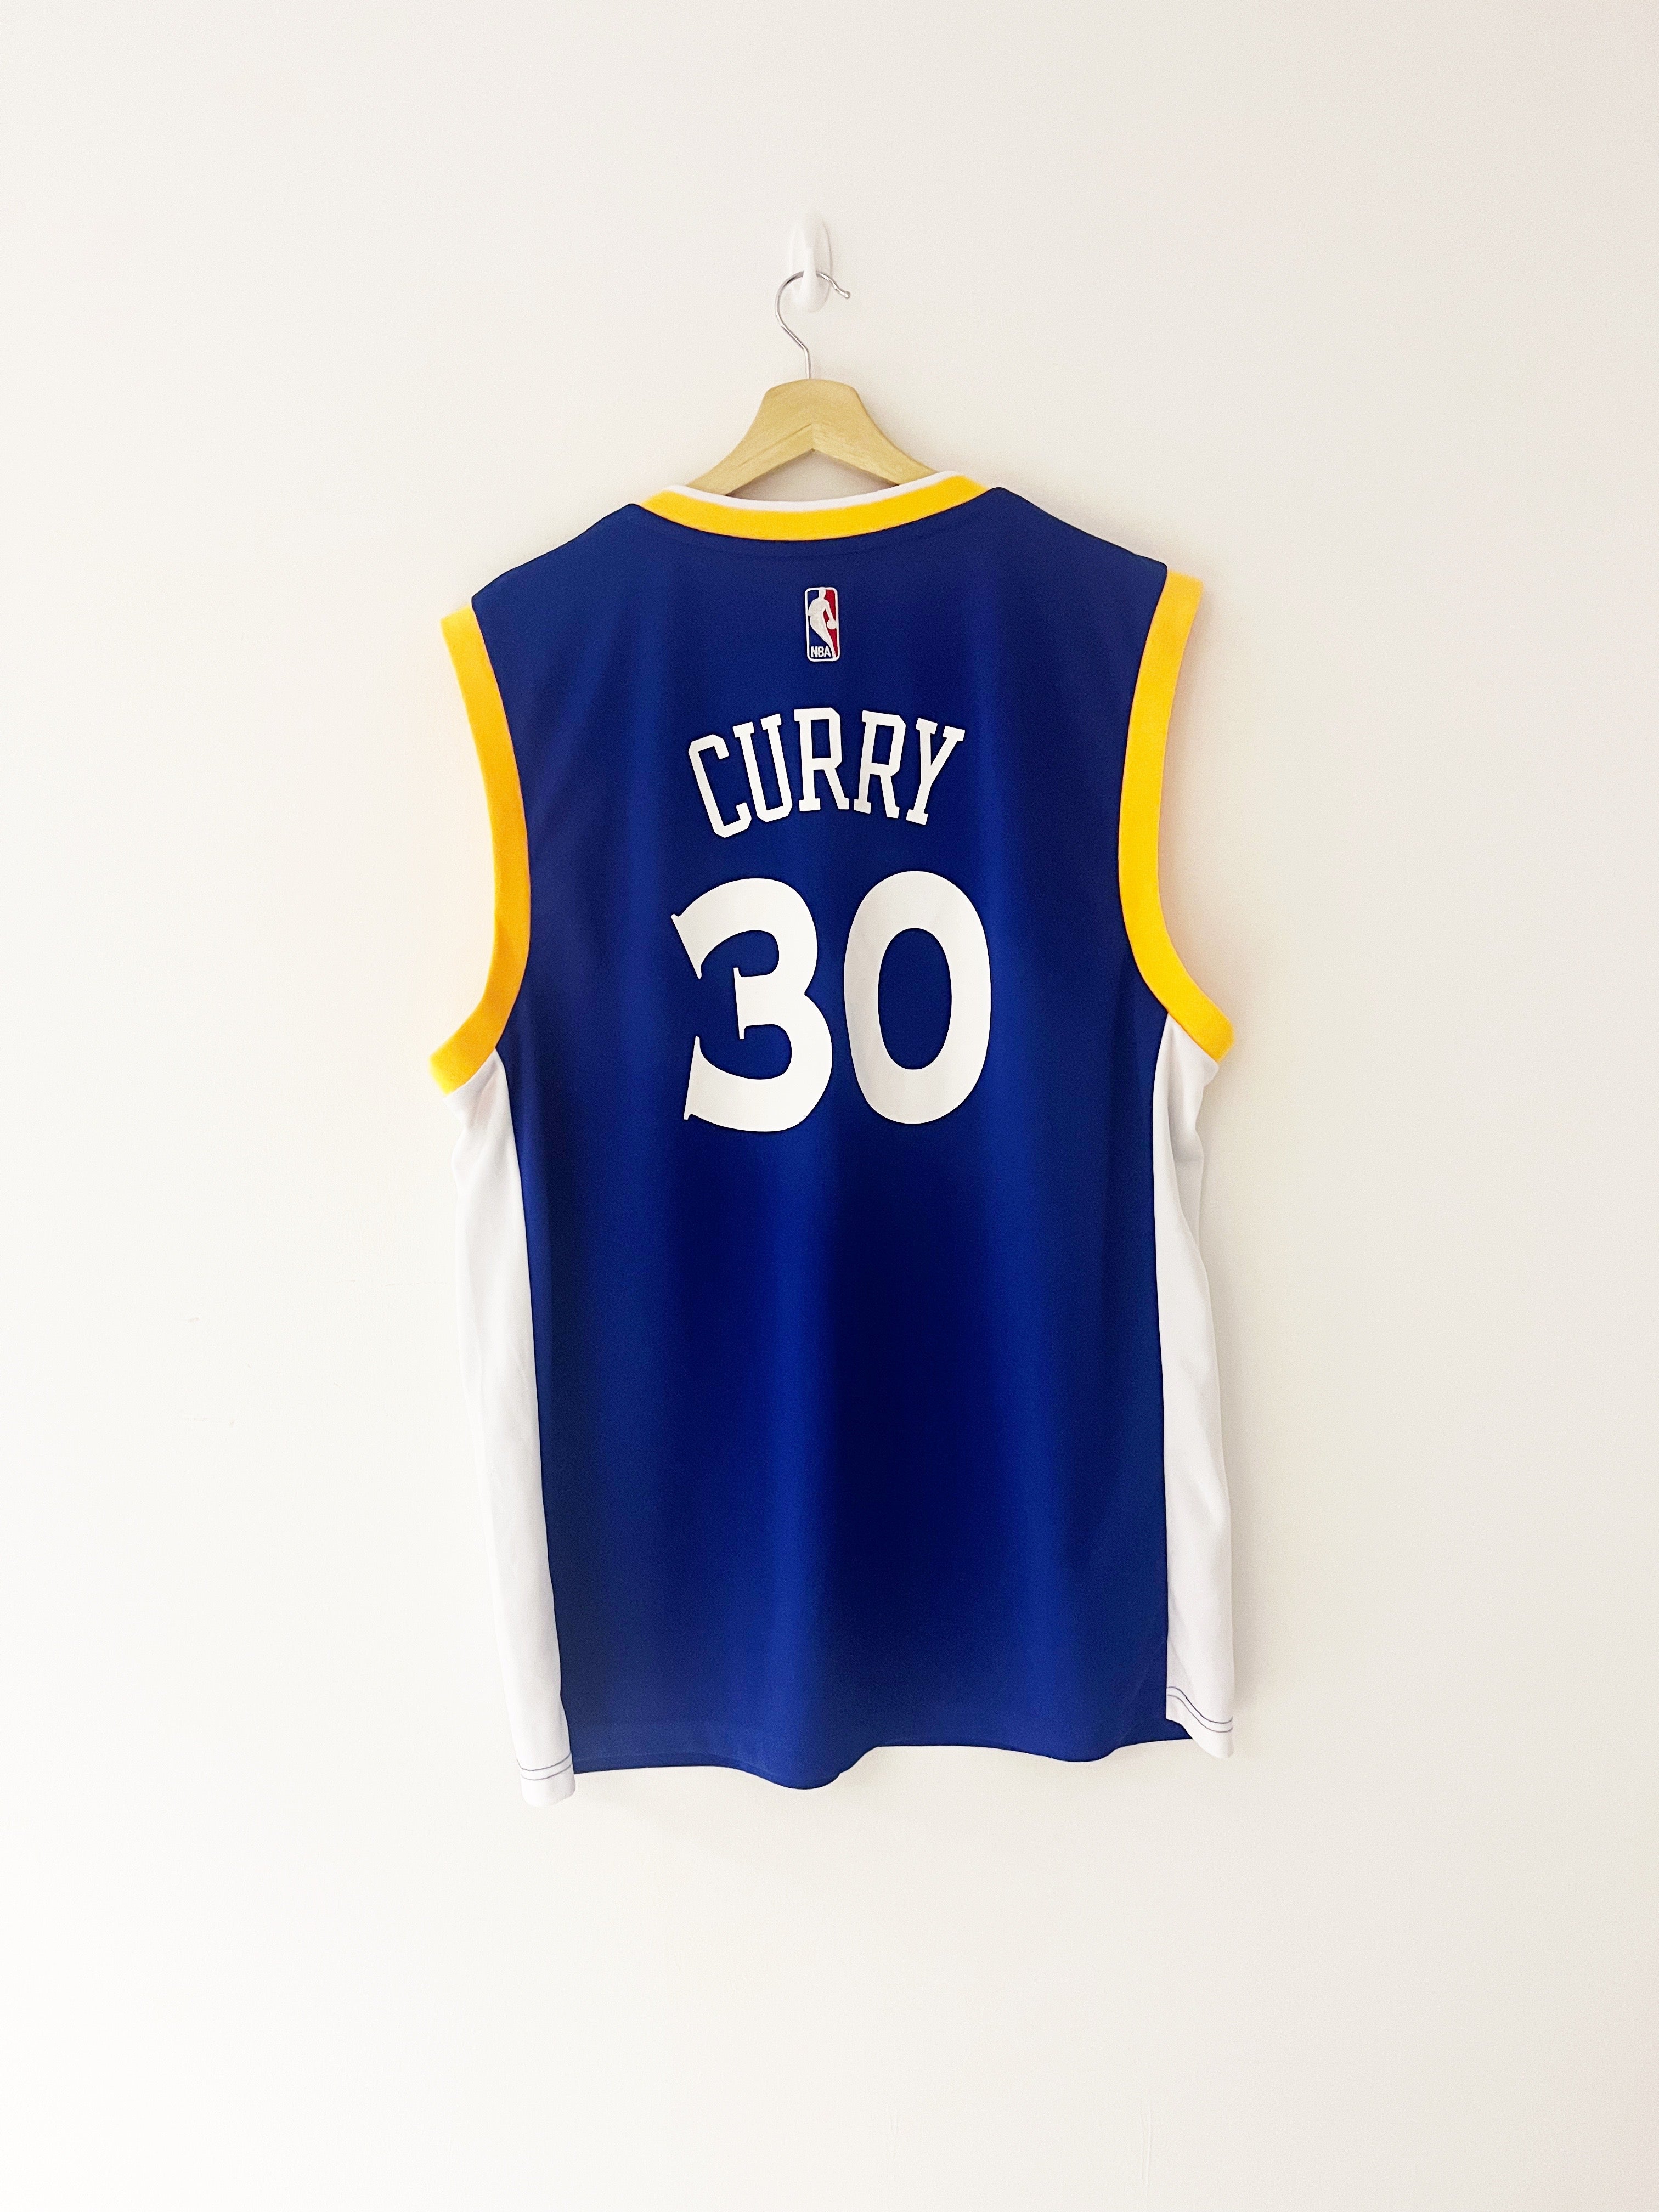 2016/17 Golden State Warriors Adidas Home Jersey Curry #30 (L) 9/10